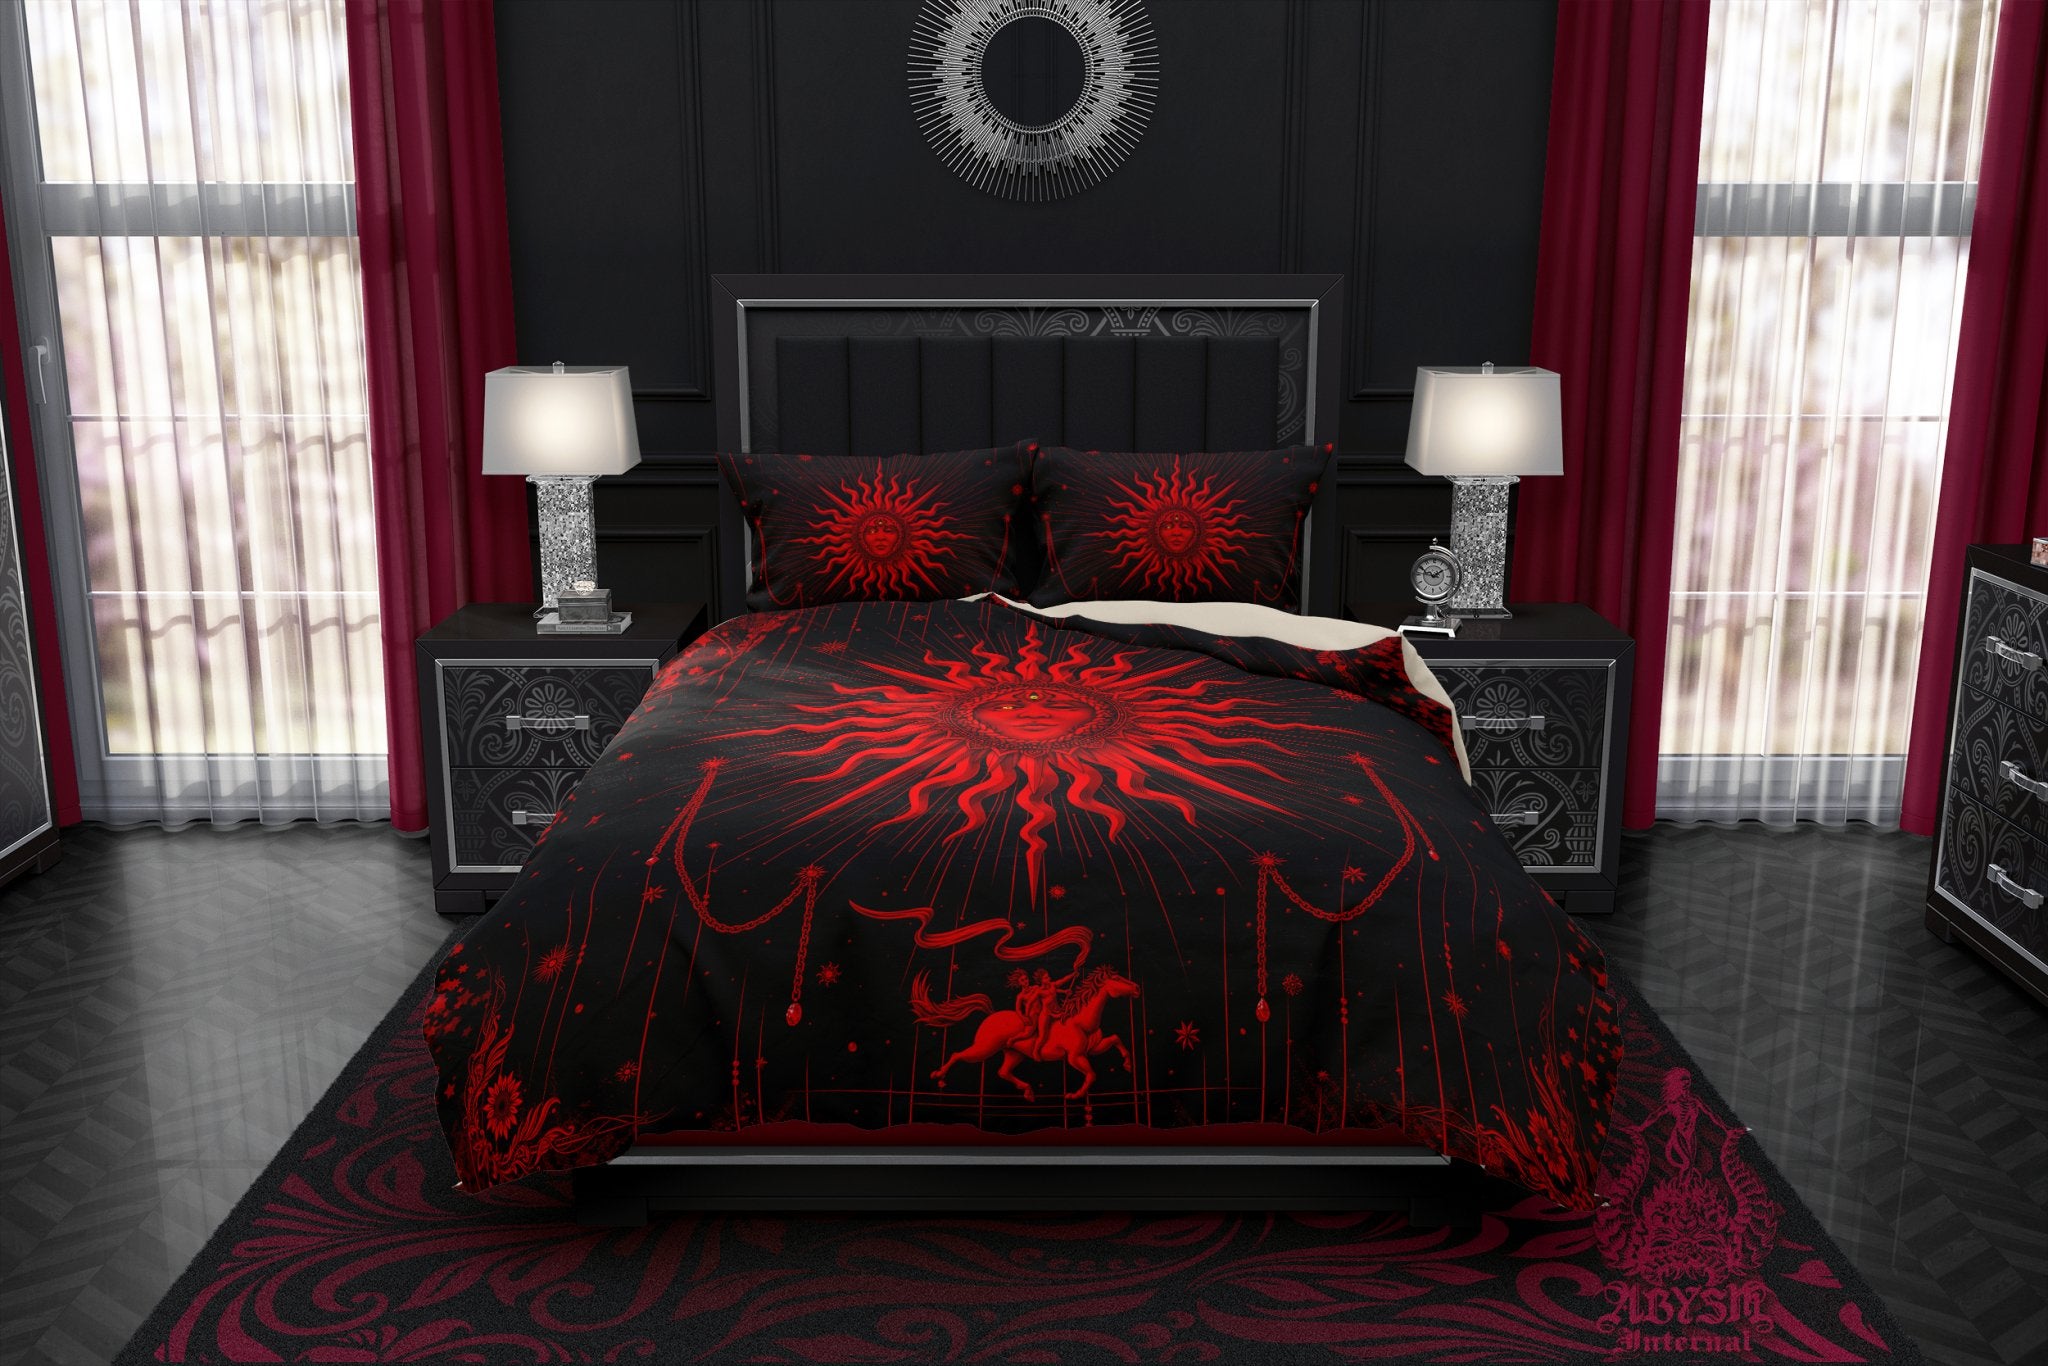 Gothic Sun Duvet Cover, Bed Covering, Esoteric Comforter, Bloody Goth Bedroom Decor King, Queen & Twin Bedding Set - Tarot Arcana Art, Red Black - Abysm Internal